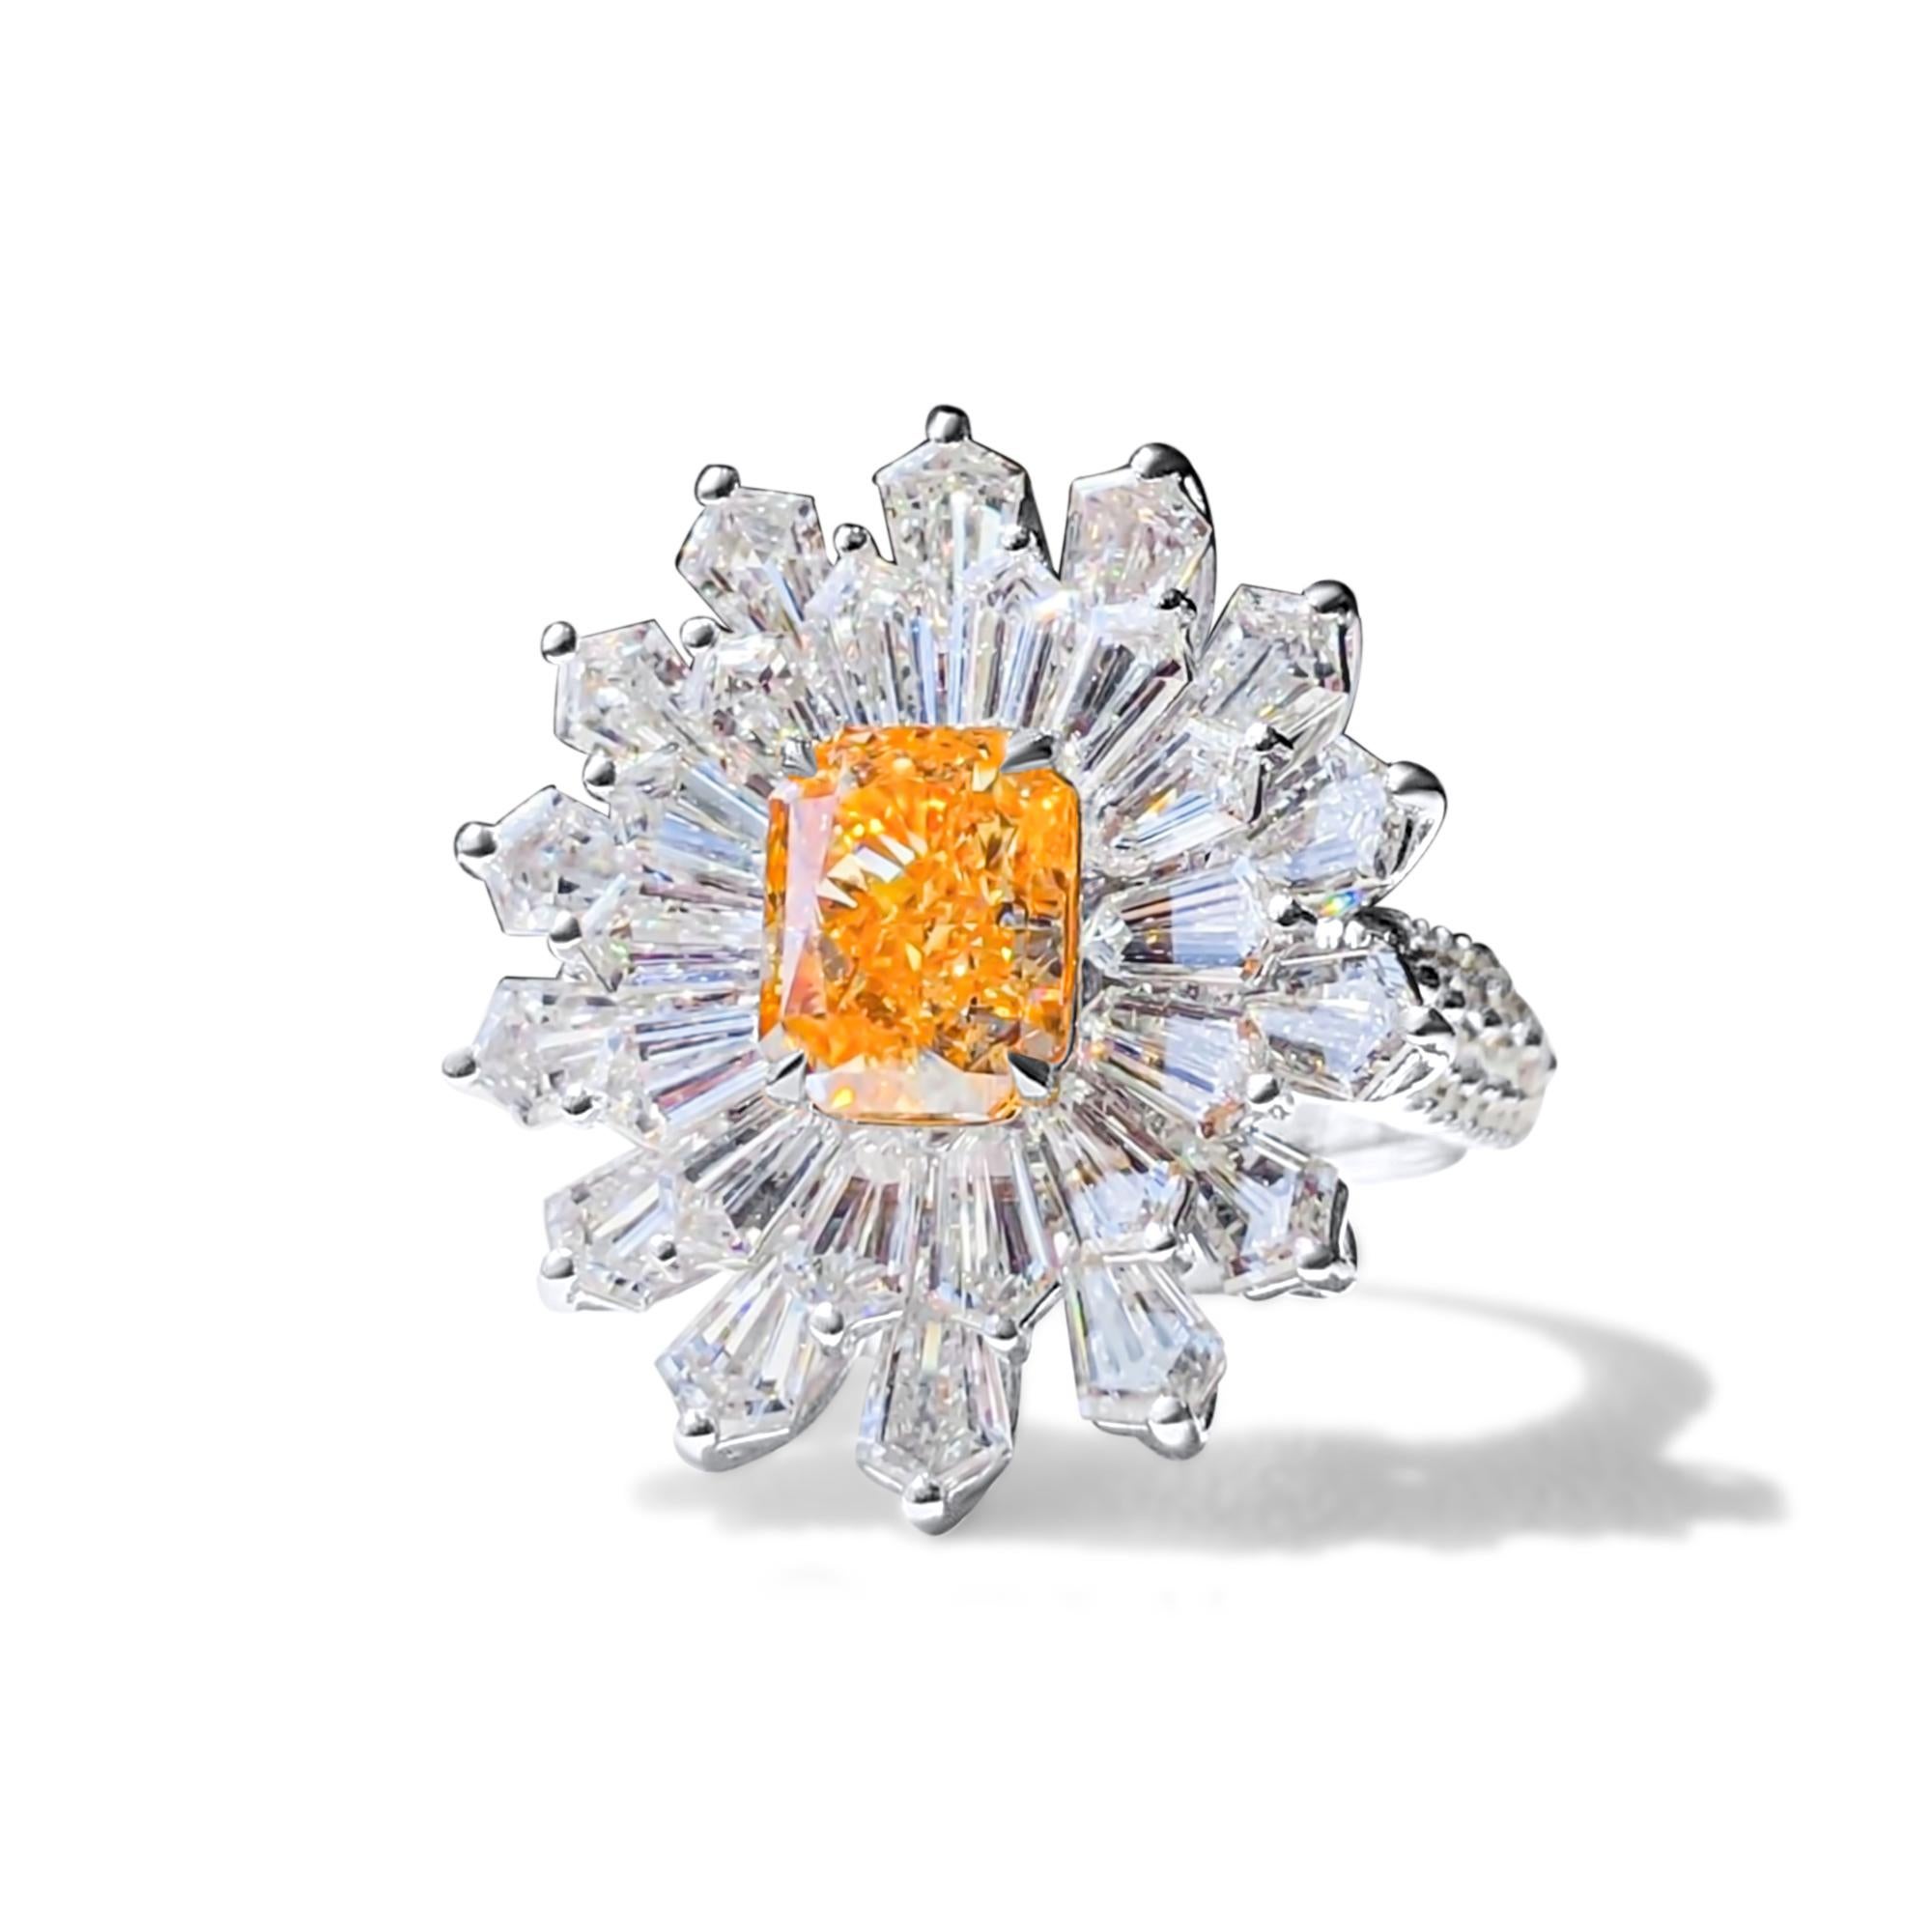 We invite you to discover this charming ring set with a 2.02 carat GIA certified Orange diamond accented with colorless baguette diamonds of 3 carats in total. Versatile, you can also wear it as a magnificent pendant 

New ring 
Main diamond: Fancy